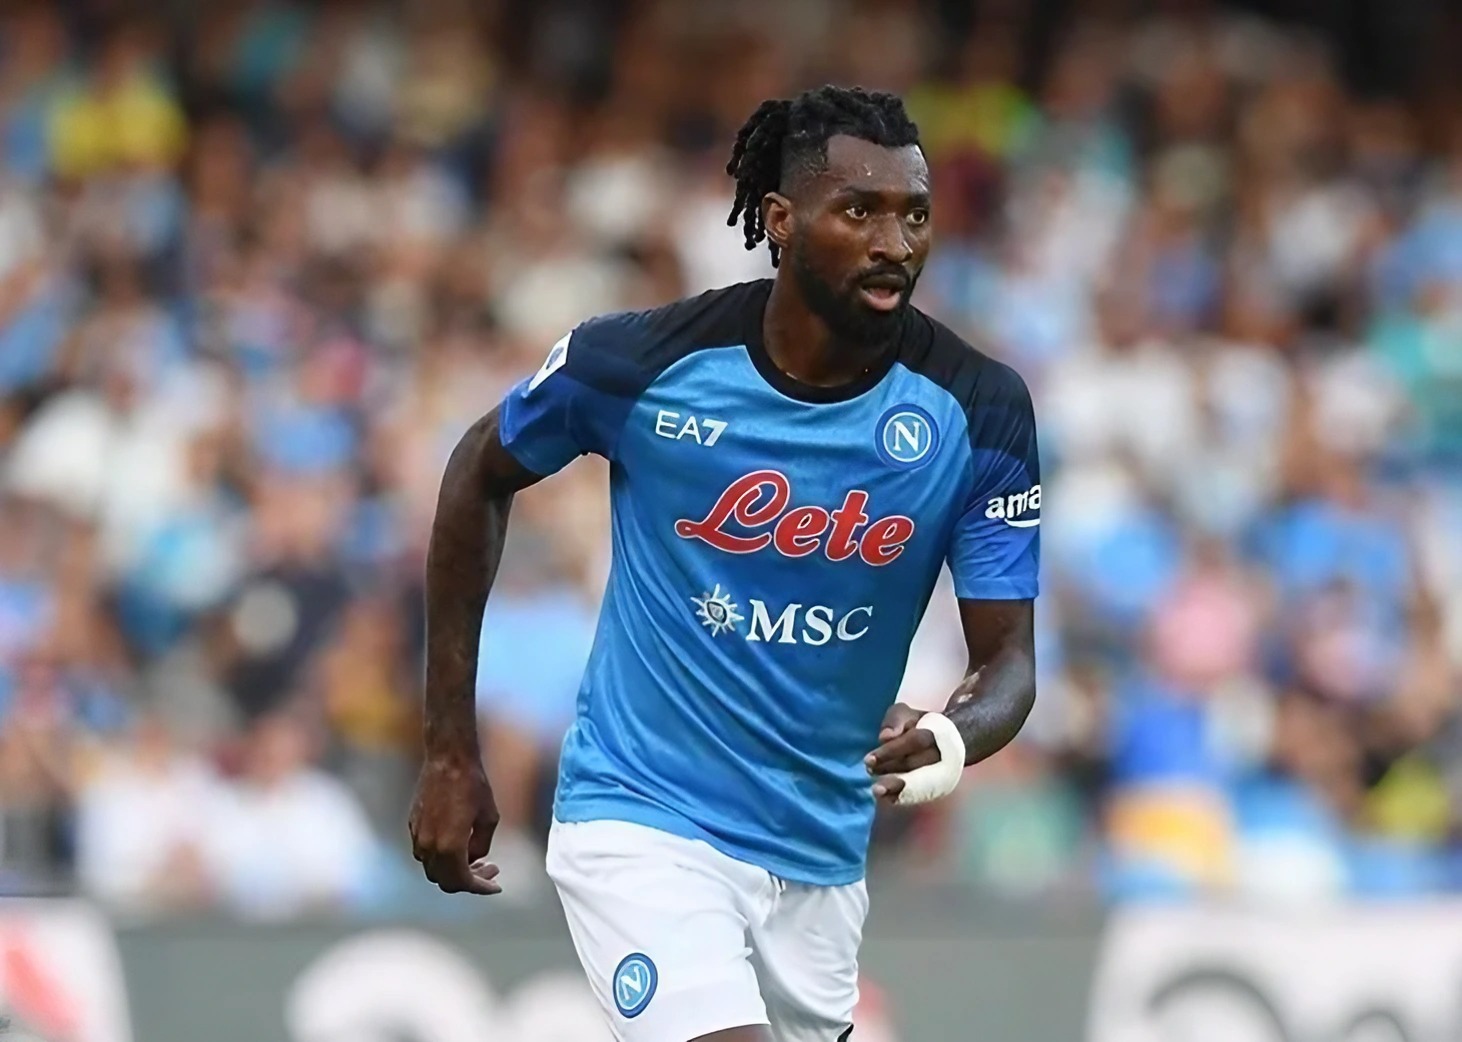 André-Frank Zambo Anguissa, SSC Napoli footballer, during a match